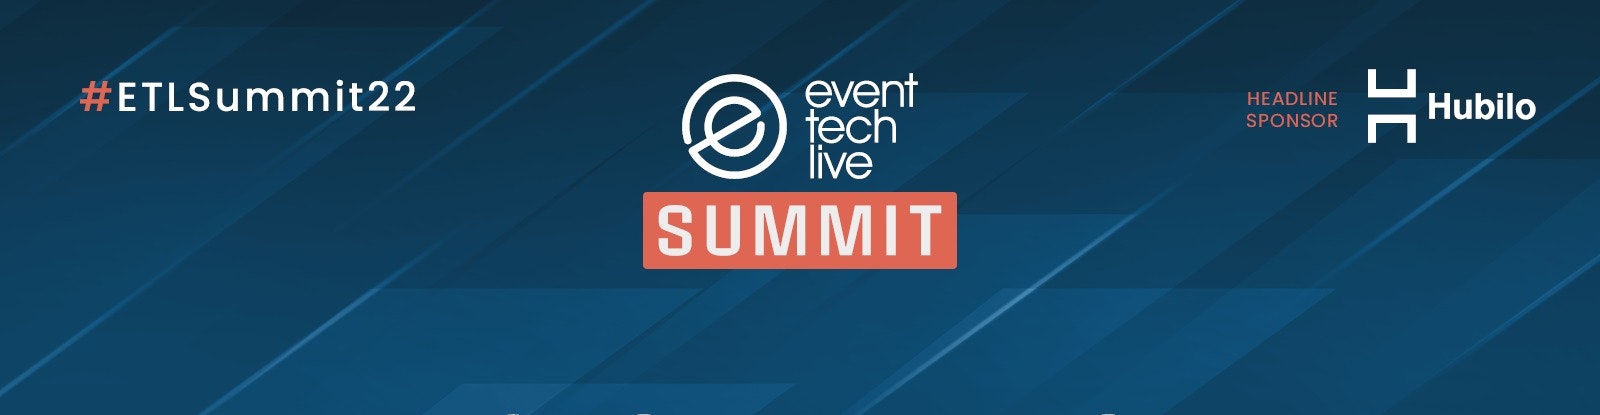 Cover image of Event Tech Live Summit 2022